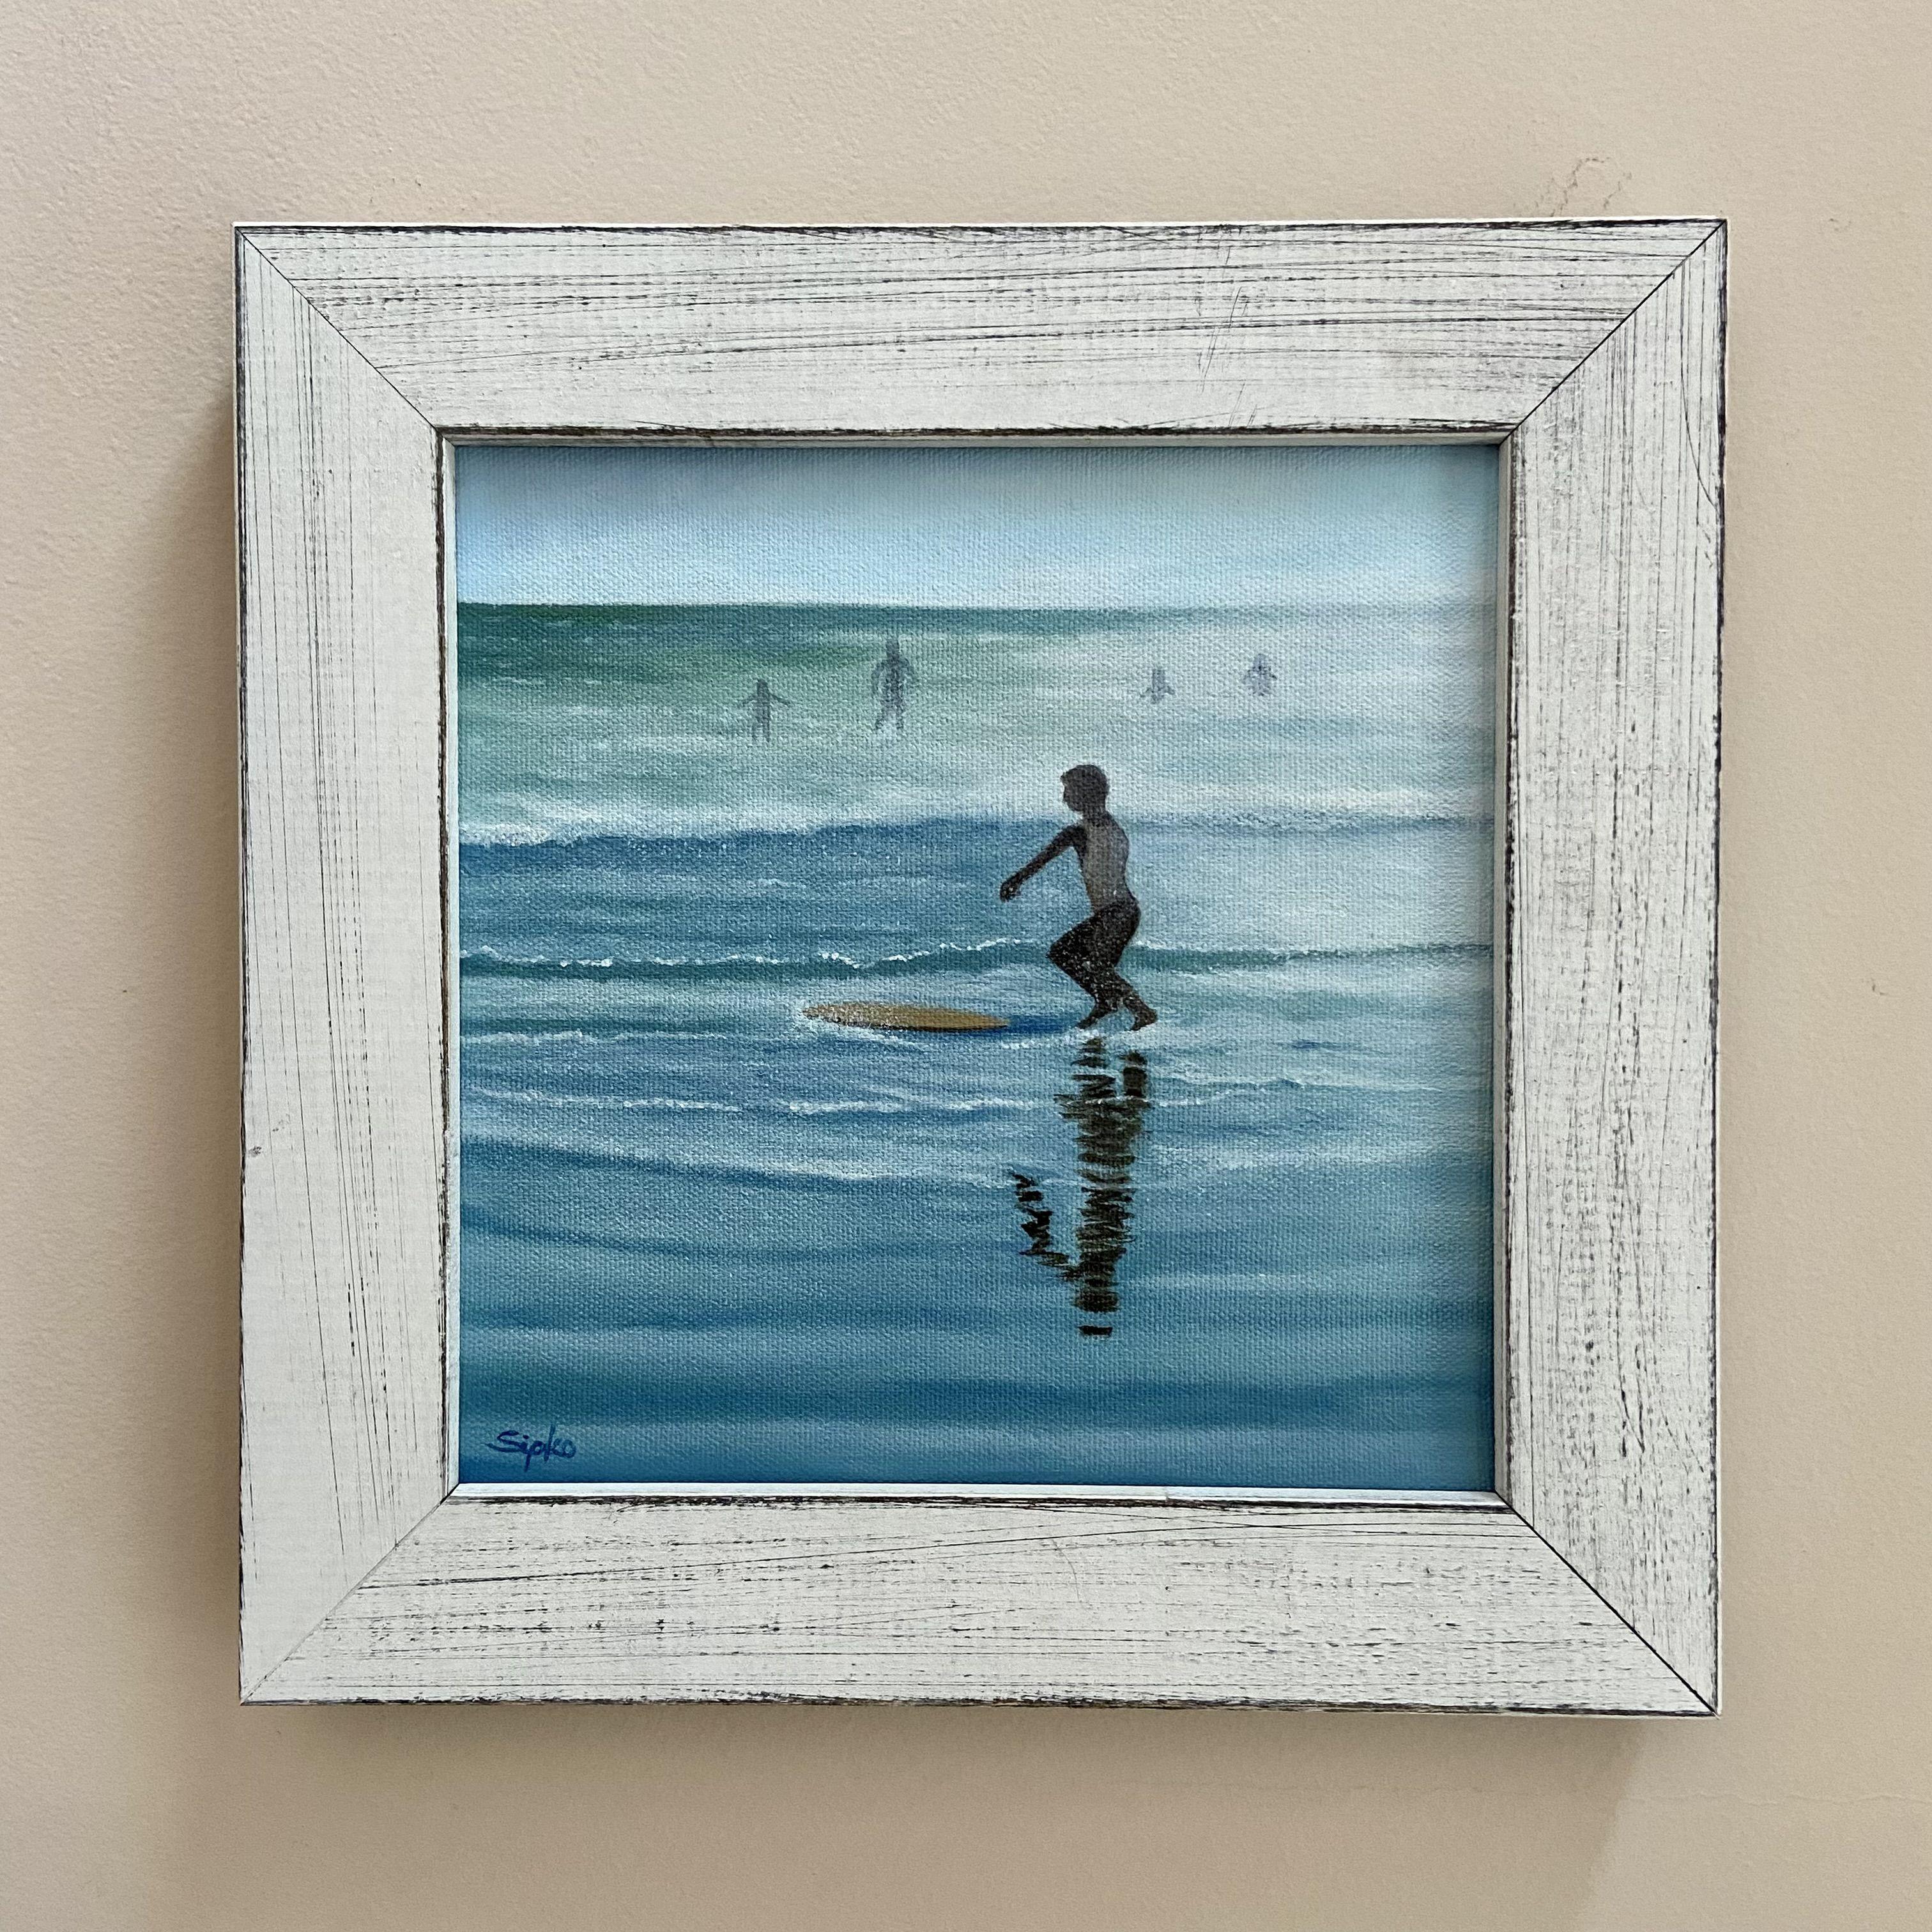 This is a small beach scene with a skim board being thrown by a young man at the moment when bright hazy light turns everything into a silhouette.   I enjoy the beach scenes at all hours of the day and enjoy capturing the moment.  This piece will